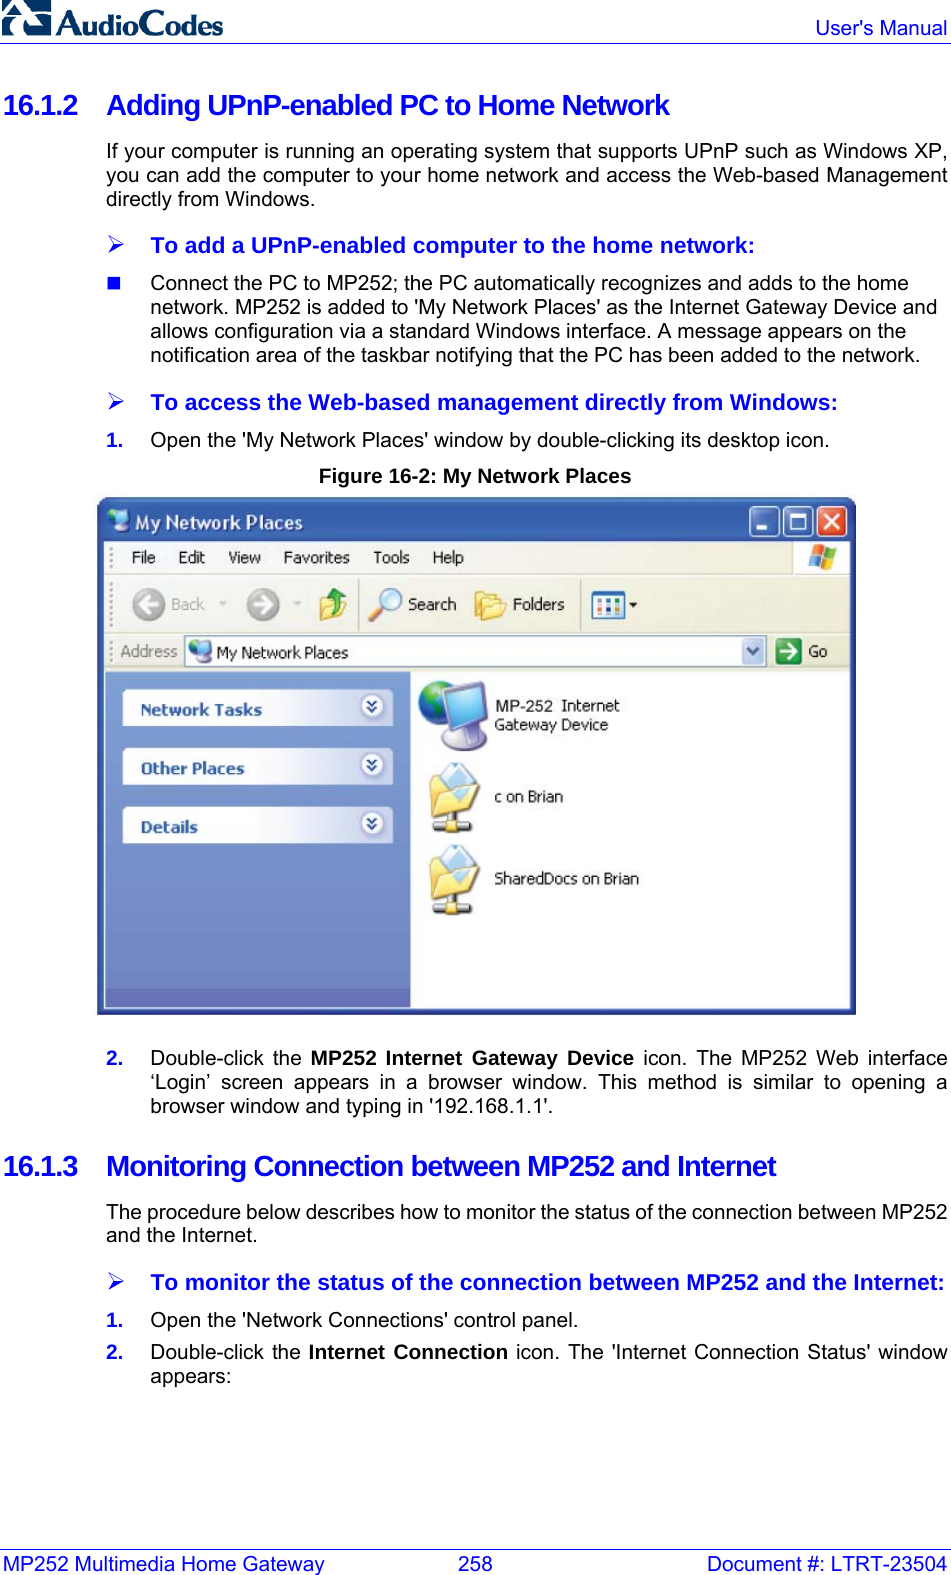 MP252 Multimedia Home Gateway  258  Document #: LTRT-23504  User&apos;s Manual  16.1.2  Adding UPnP-enabled PC to Home Network If your computer is running an operating system that supports UPnP such as Windows XP, you can add the computer to your home network and access the Web-based Management directly from Windows. ¾ To add a UPnP-enabled computer to the home network:  Connect the PC to MP252; the PC automatically recognizes and adds to the home network. MP252 is added to &apos;My Network Places&apos; as the Internet Gateway Device and allows configuration via a standard Windows interface. A message appears on the notification area of the taskbar notifying that the PC has been added to the network. ¾ To access the Web-based management directly from Windows: 1.  Open the &apos;My Network Places&apos; window by double-clicking its desktop icon.  Figure 16-2: My Network Places  2.  Double-click the MP252 Internet Gateway Device icon. The MP252 Web interface ‘Login’ screen appears in a browser window. This method is similar to opening a browser window and typing in &apos;192.168.1.1&apos;. 16.1.3 Monitoring Connection between MP252 and Internet The procedure below describes how to monitor the status of the connection between MP252 and the Internet. ¾ To monitor the status of the connection between MP252 and the Internet: 1.  Open the &apos;Network Connections&apos; control panel. 2.  Double-click the Internet Connection icon. The &apos;Internet Connection Status&apos; window appears: 